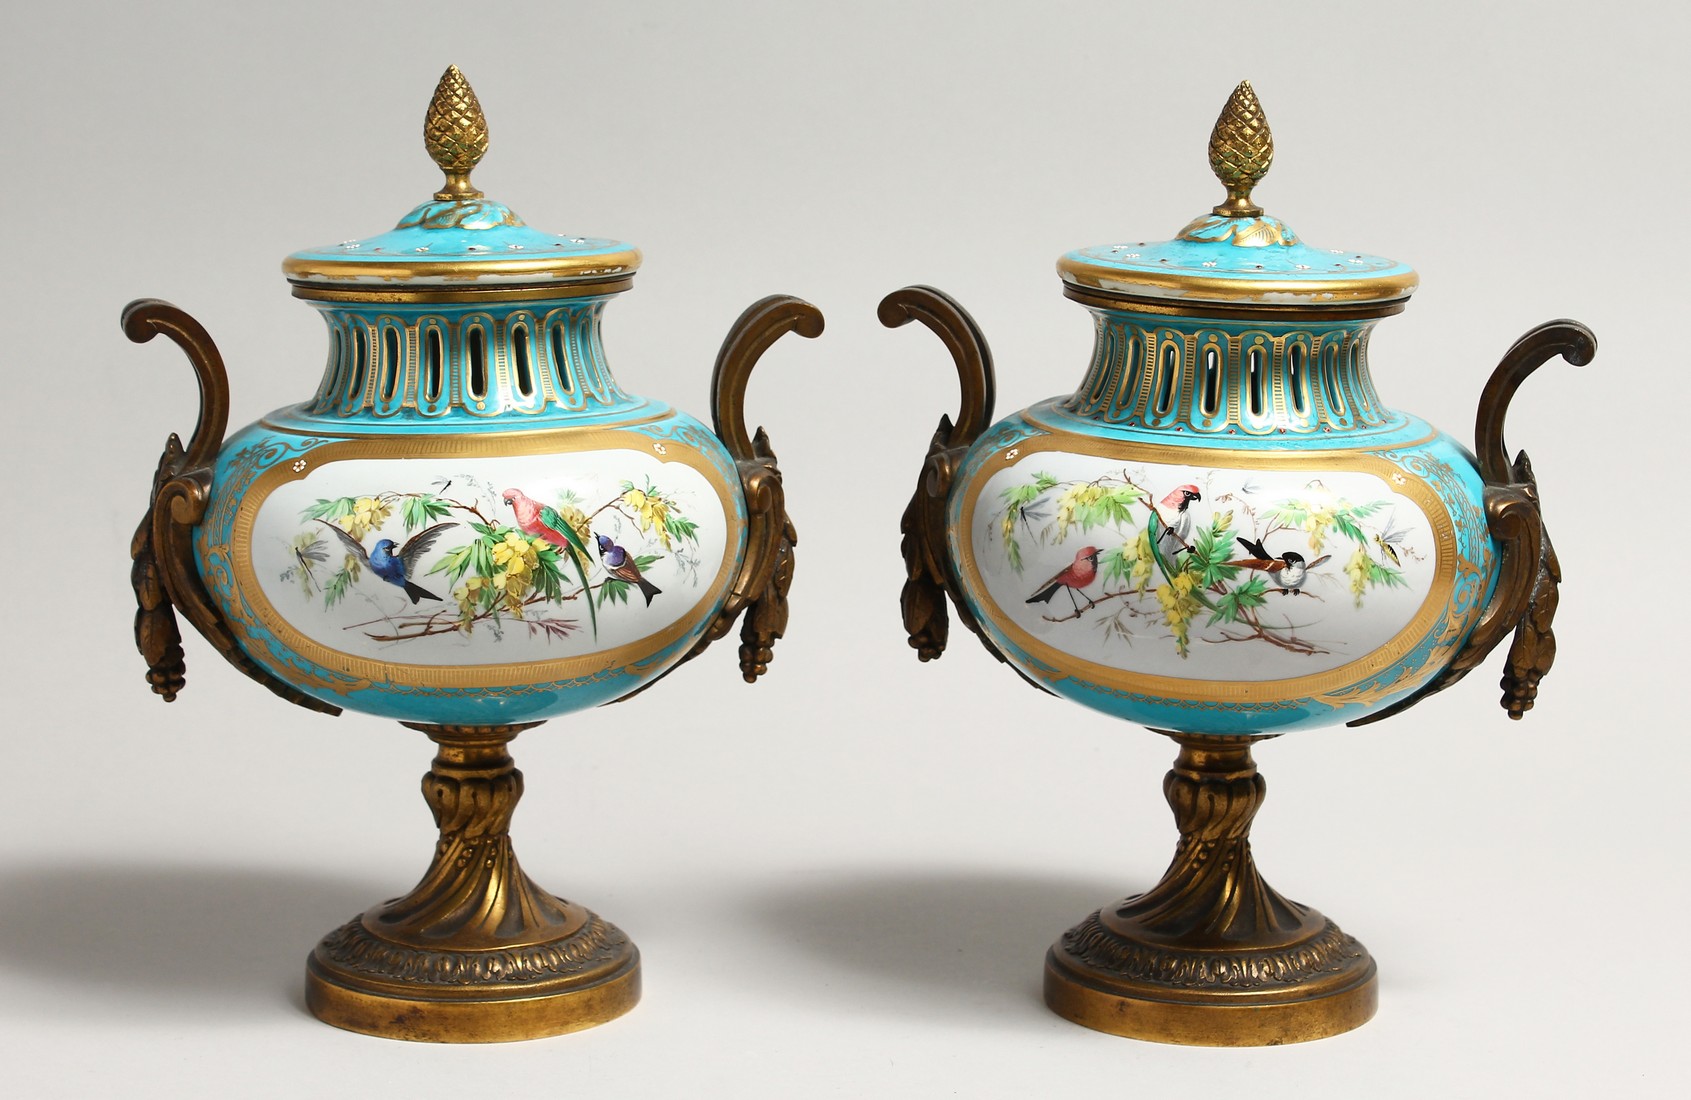 A SUPERB PAIR OF SEVRES PORCELAIN ORMOLU MOUNTED CIRCULAR VASES AND COVERS, painted with reverse